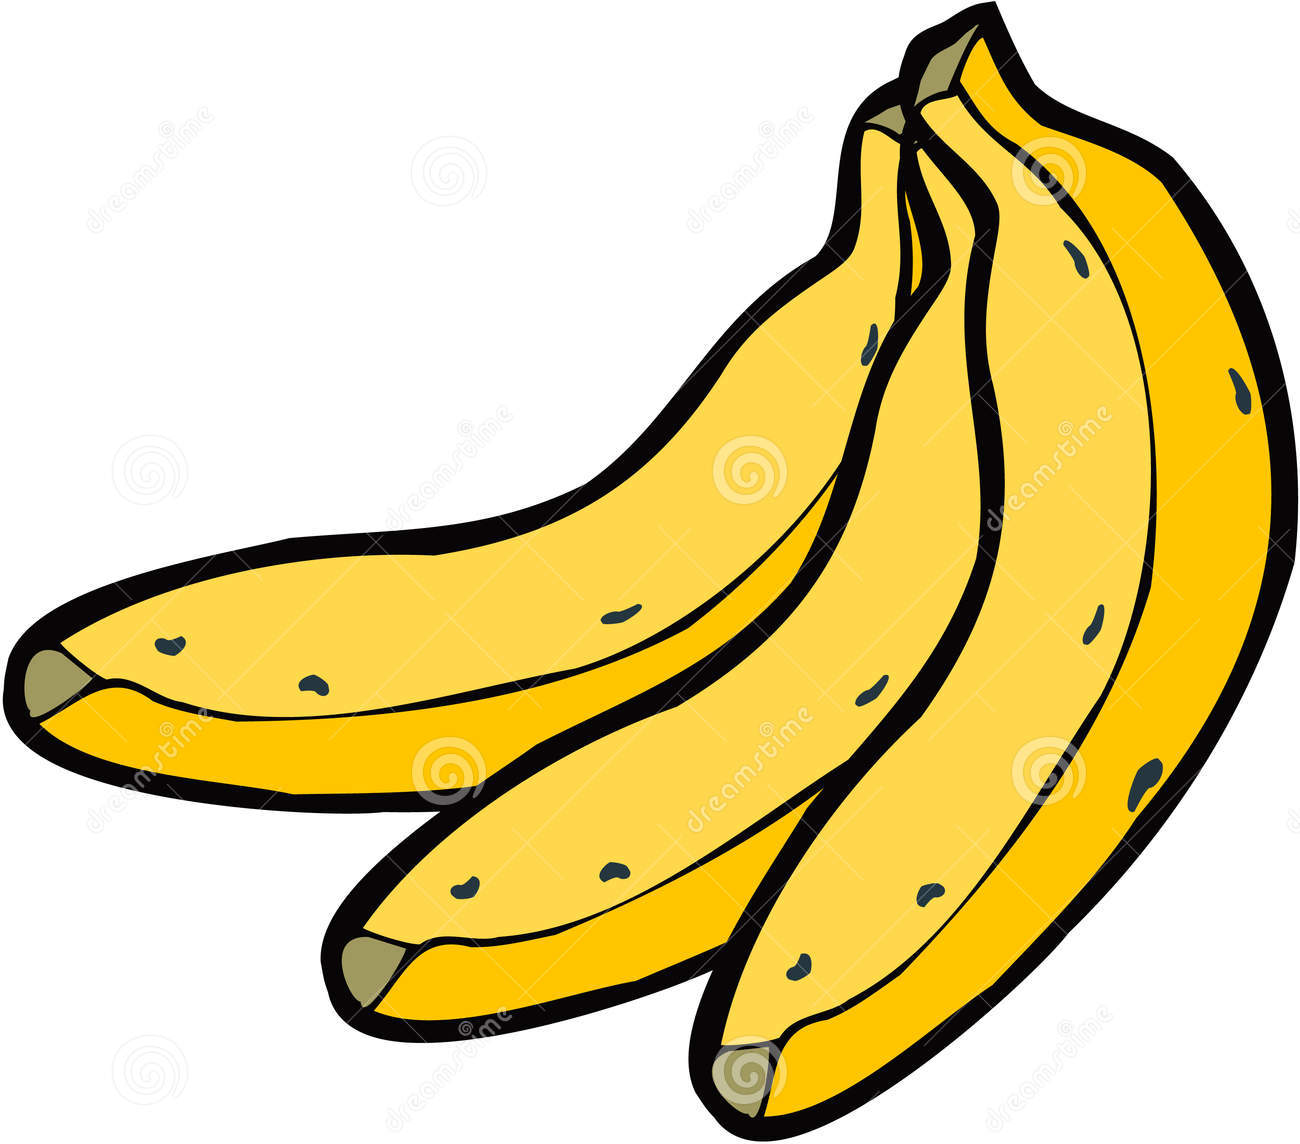 Banana clipart black and white free clipart images clipartix